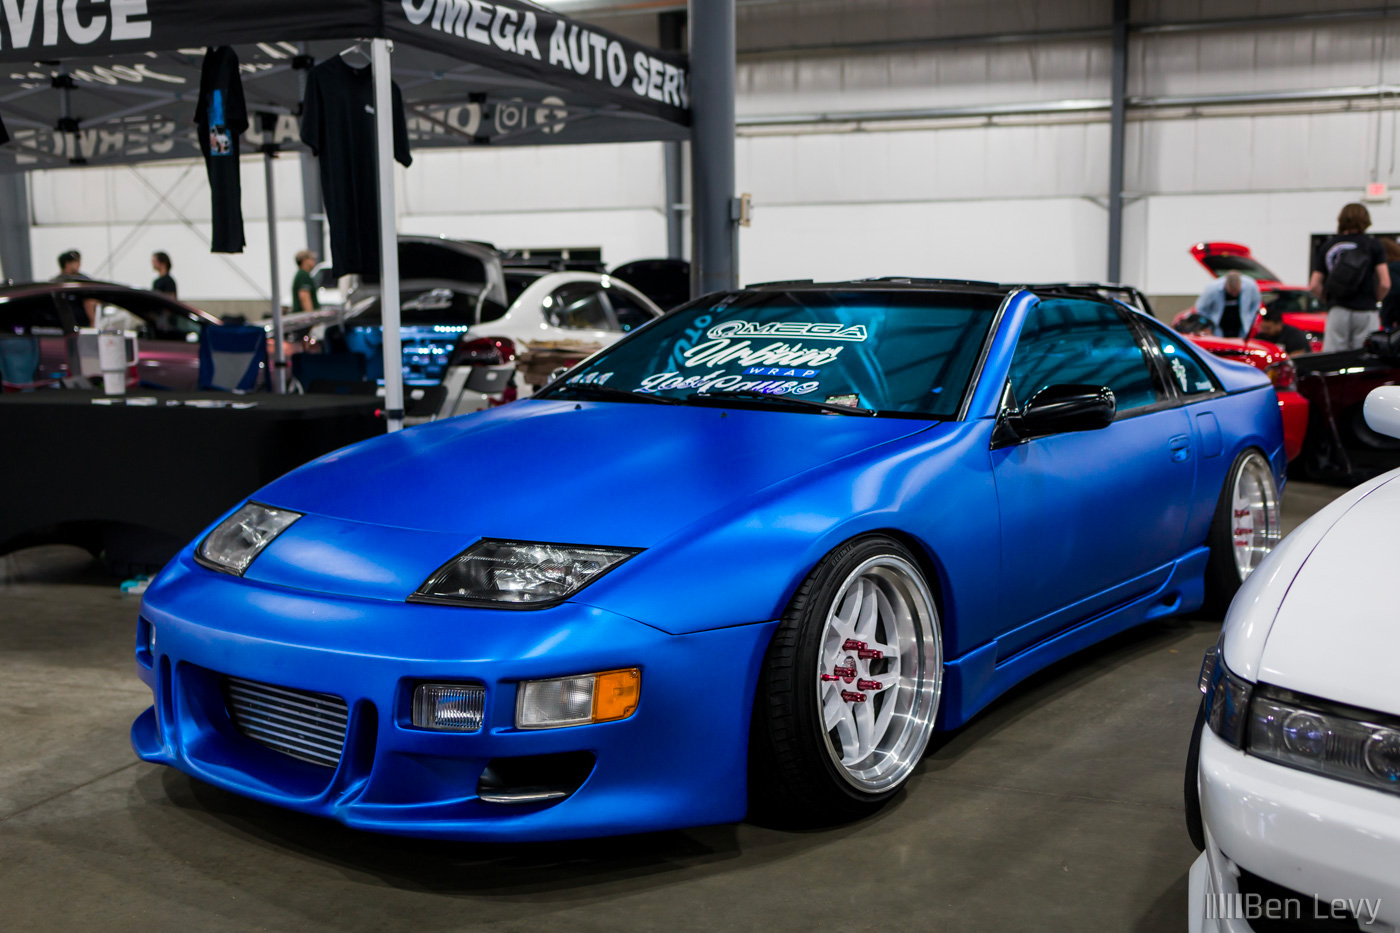 Blue Wrap on Nissan 300ZX from Omega Auto Service